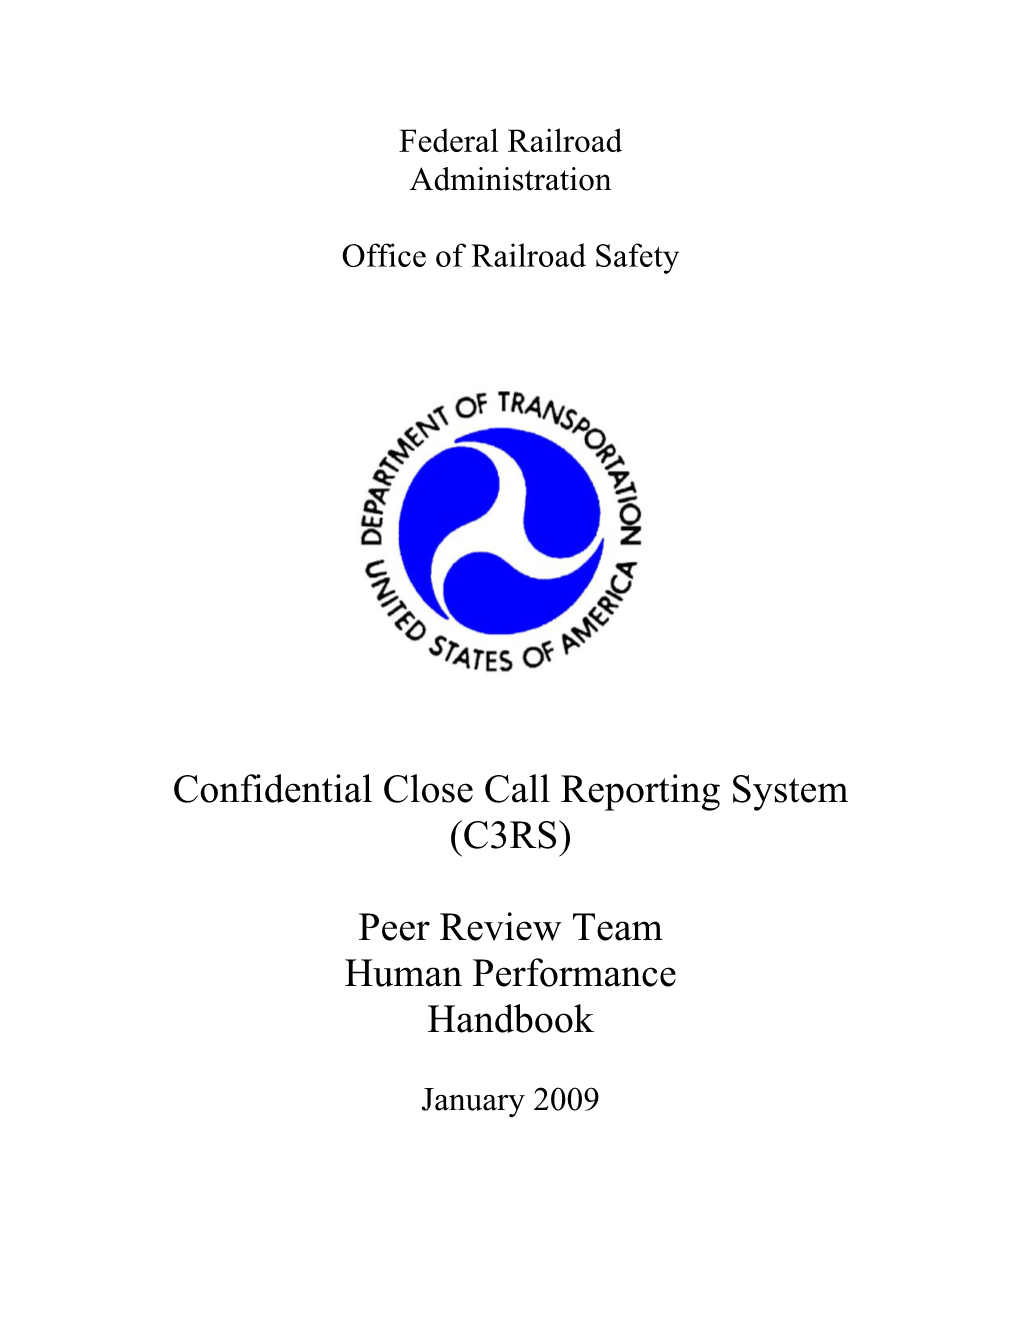 Confidential Close Call Reporting System (C3RS)